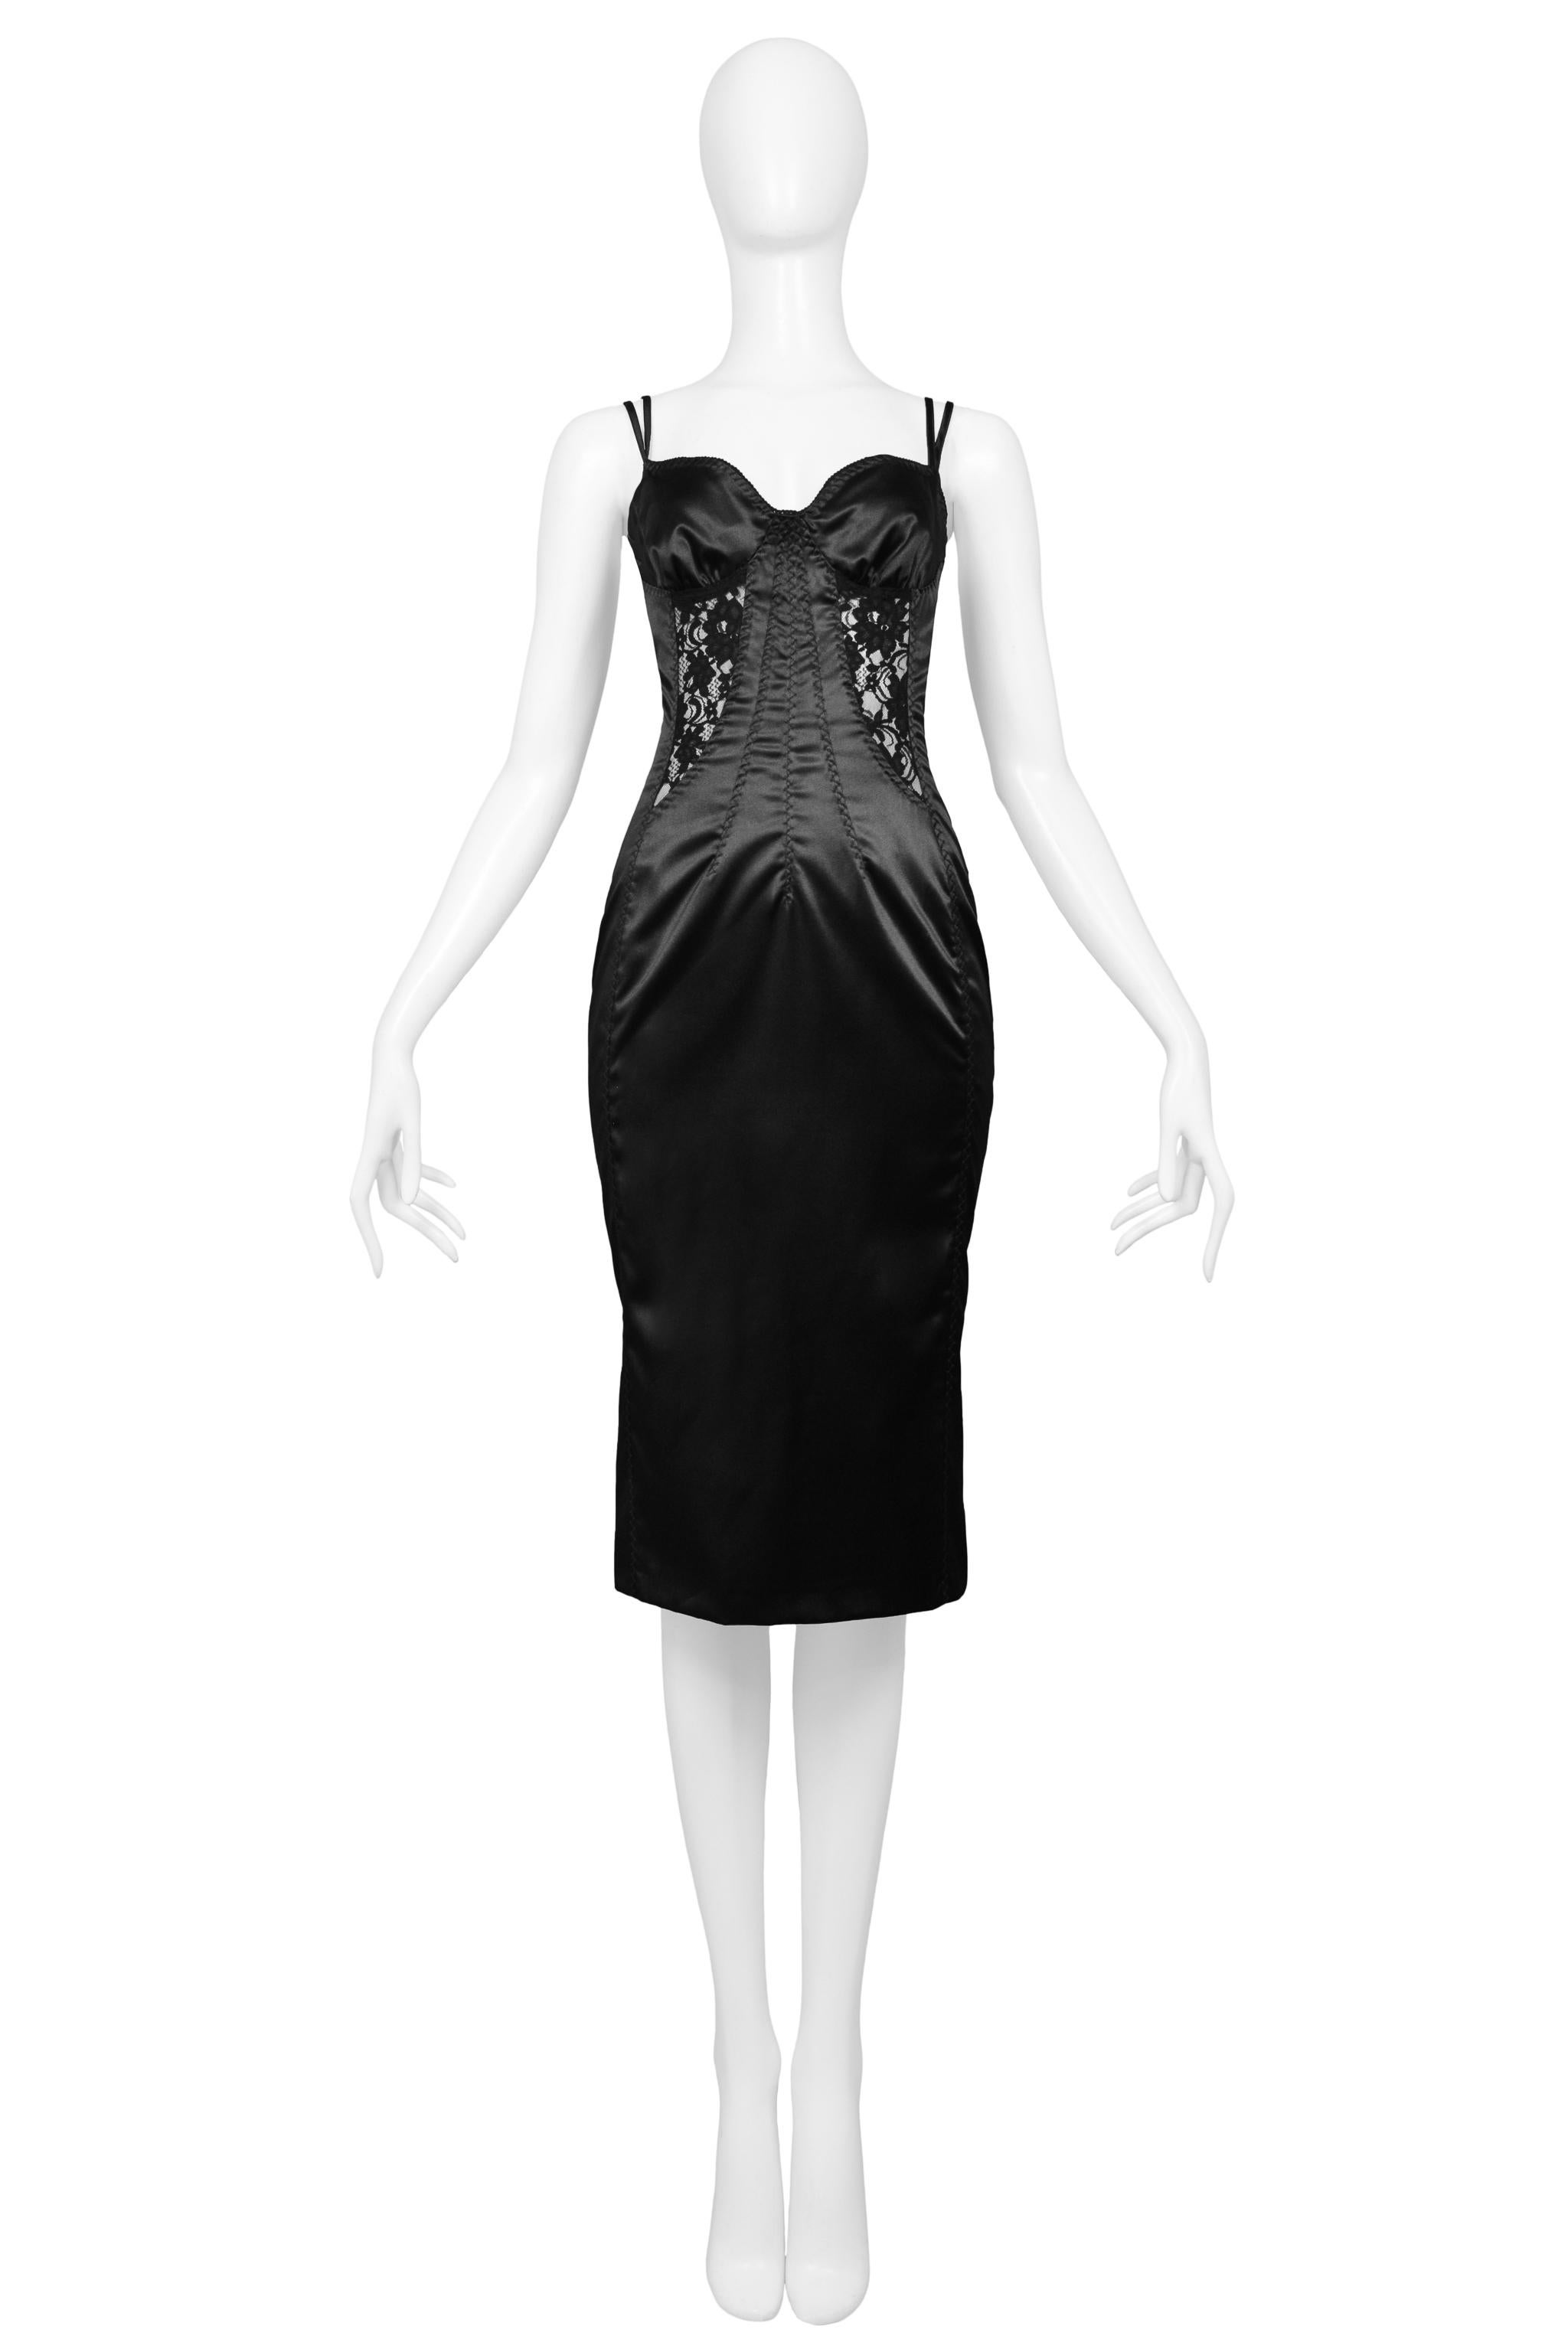 Resurrection Vintage is excited to offer a vintage Dolce & Gabbana D&G collection black bodycon lingerie-inspired dress featuring bra, corset, and girdle detailing, satin finish stretch fabric, double straps, center back zipper and knee length.